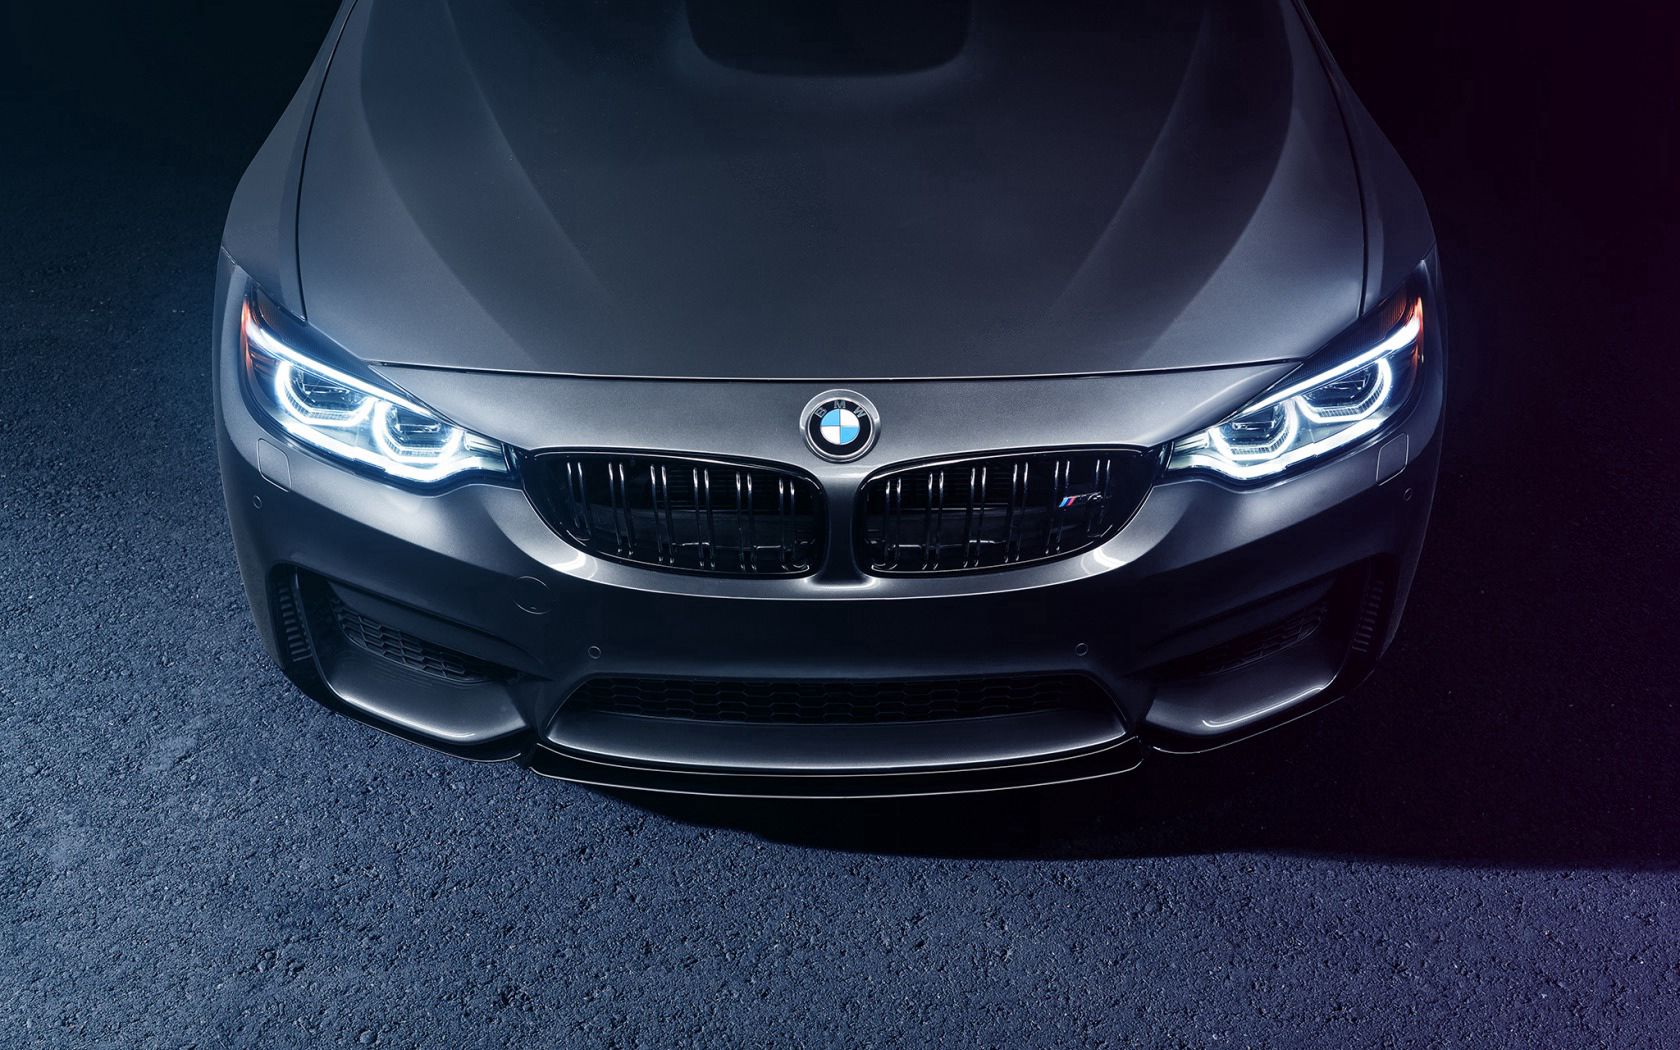 Wallpaper for mobile devices cars, hood, bmw, m4